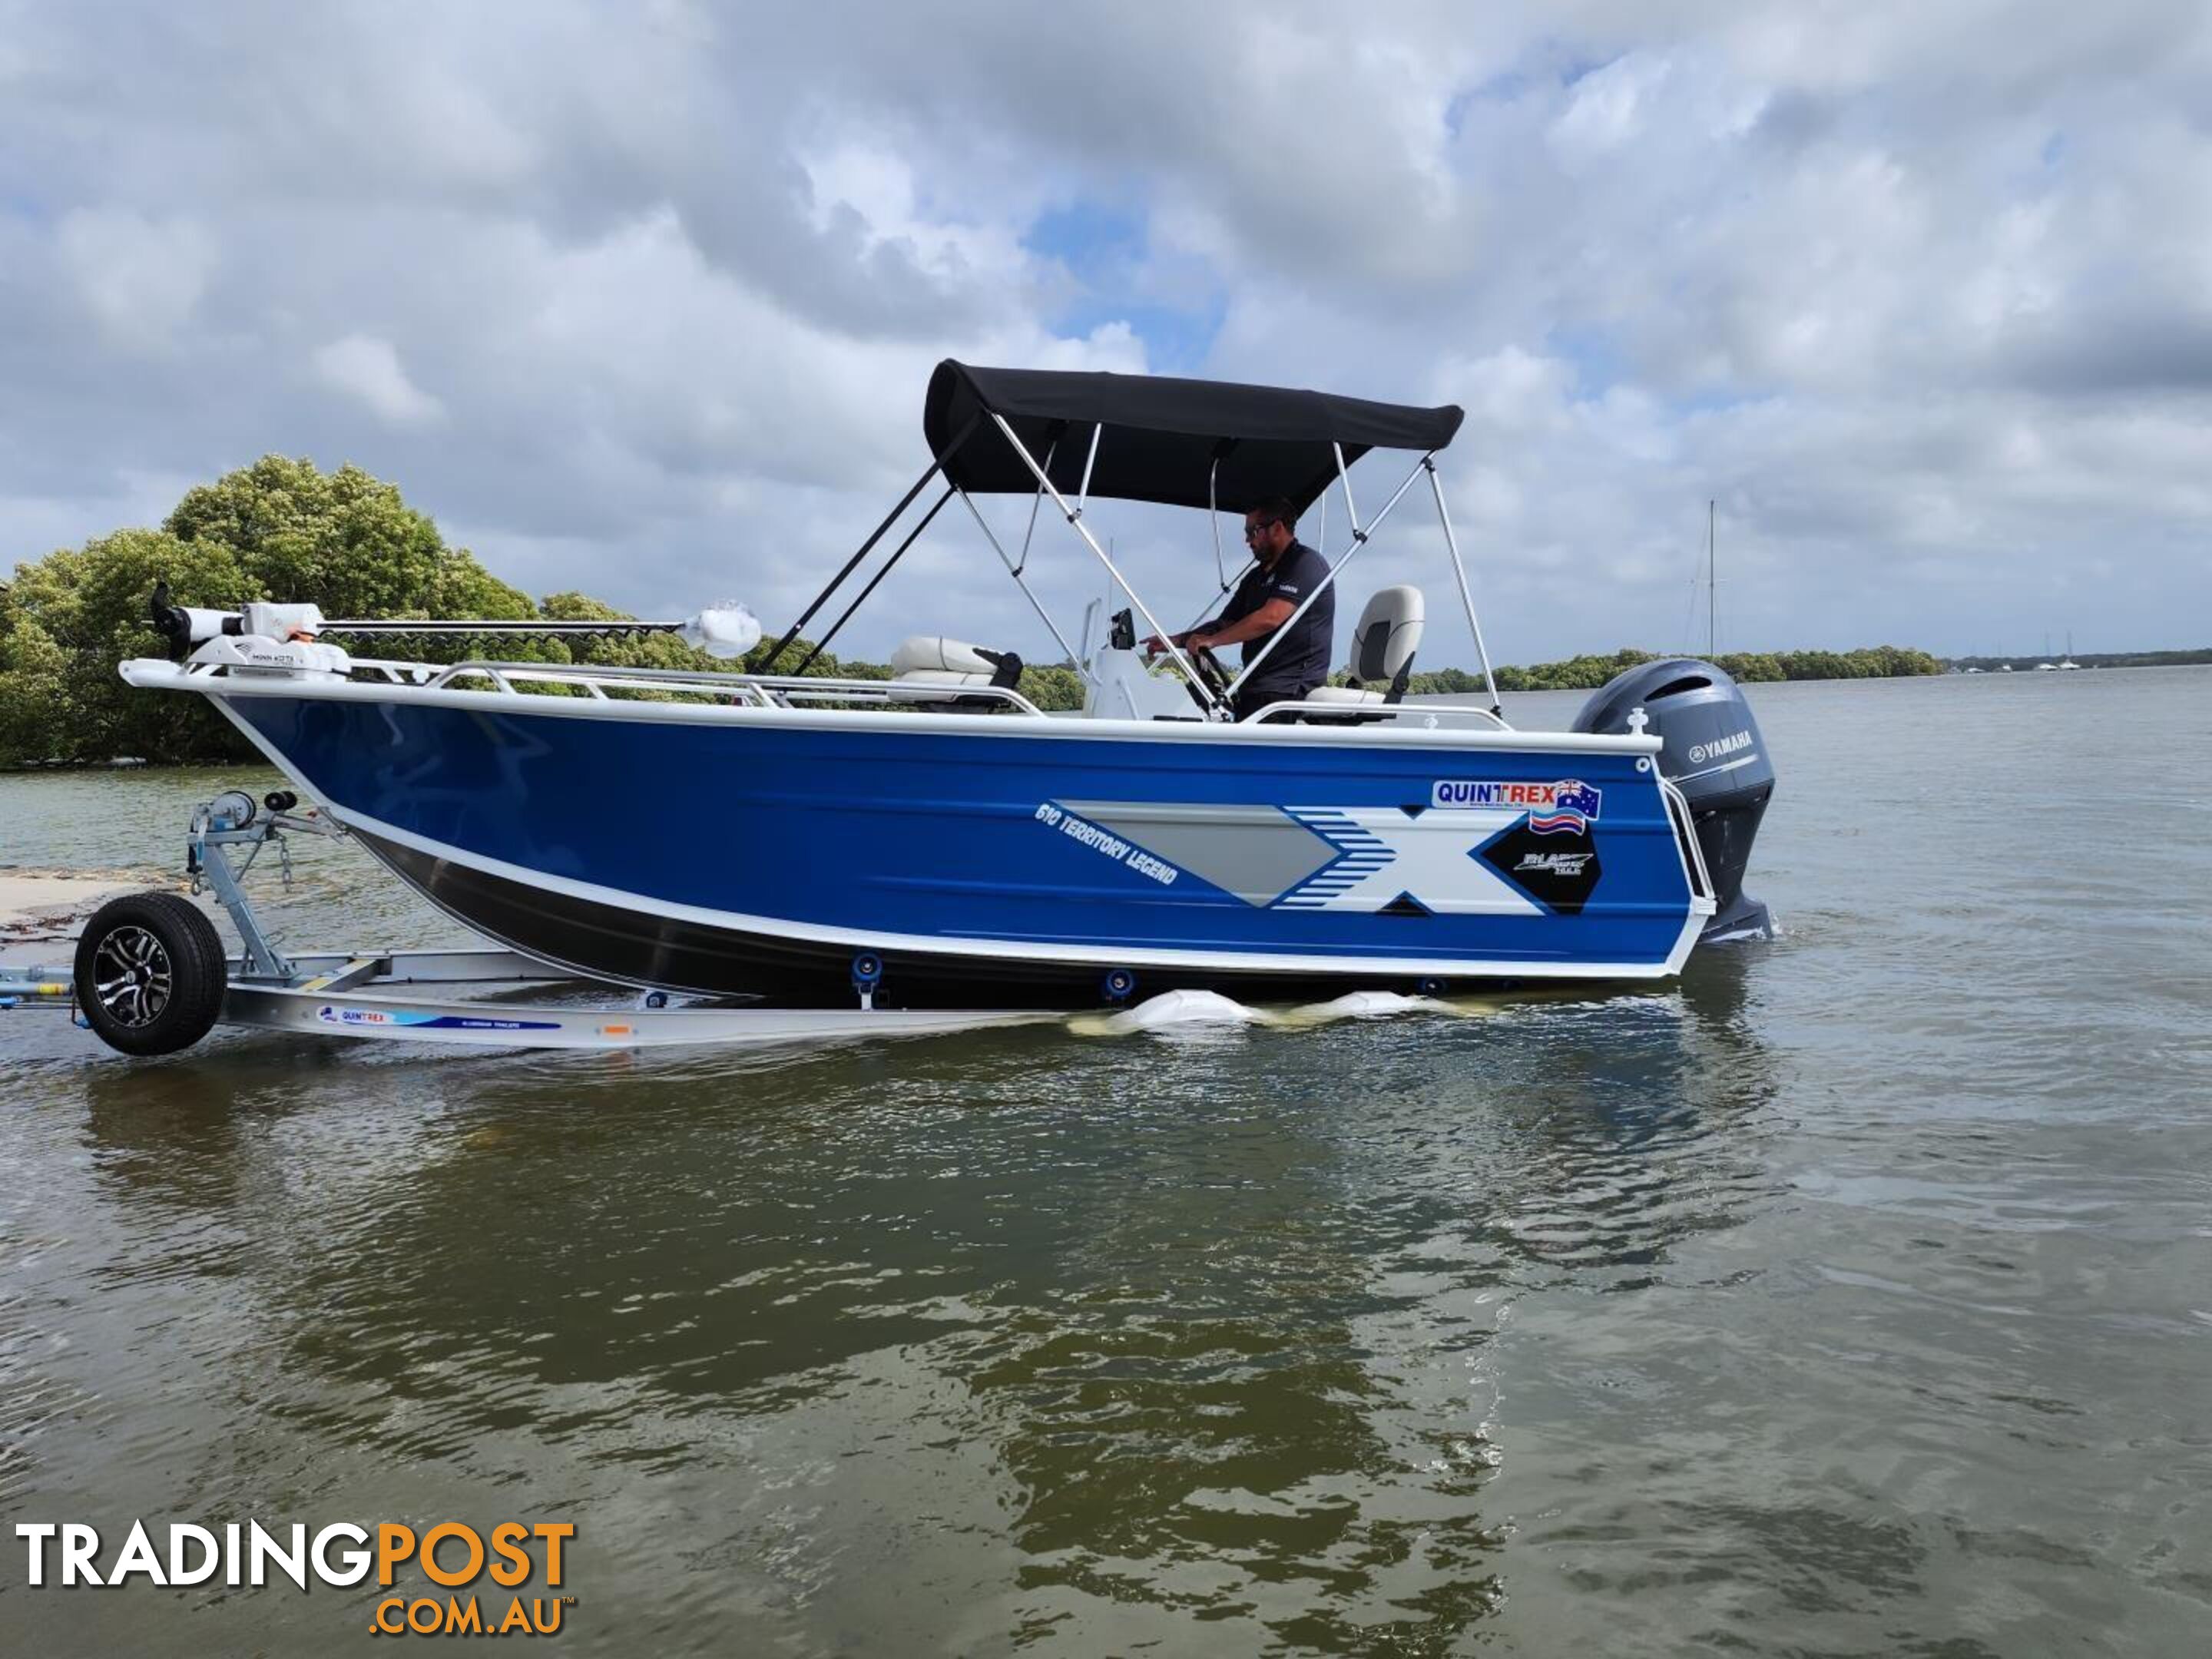 Quintrex 610 Territroy Legend + Yamaha F150HP 4-Stroke - Pack 2 for sale online prices